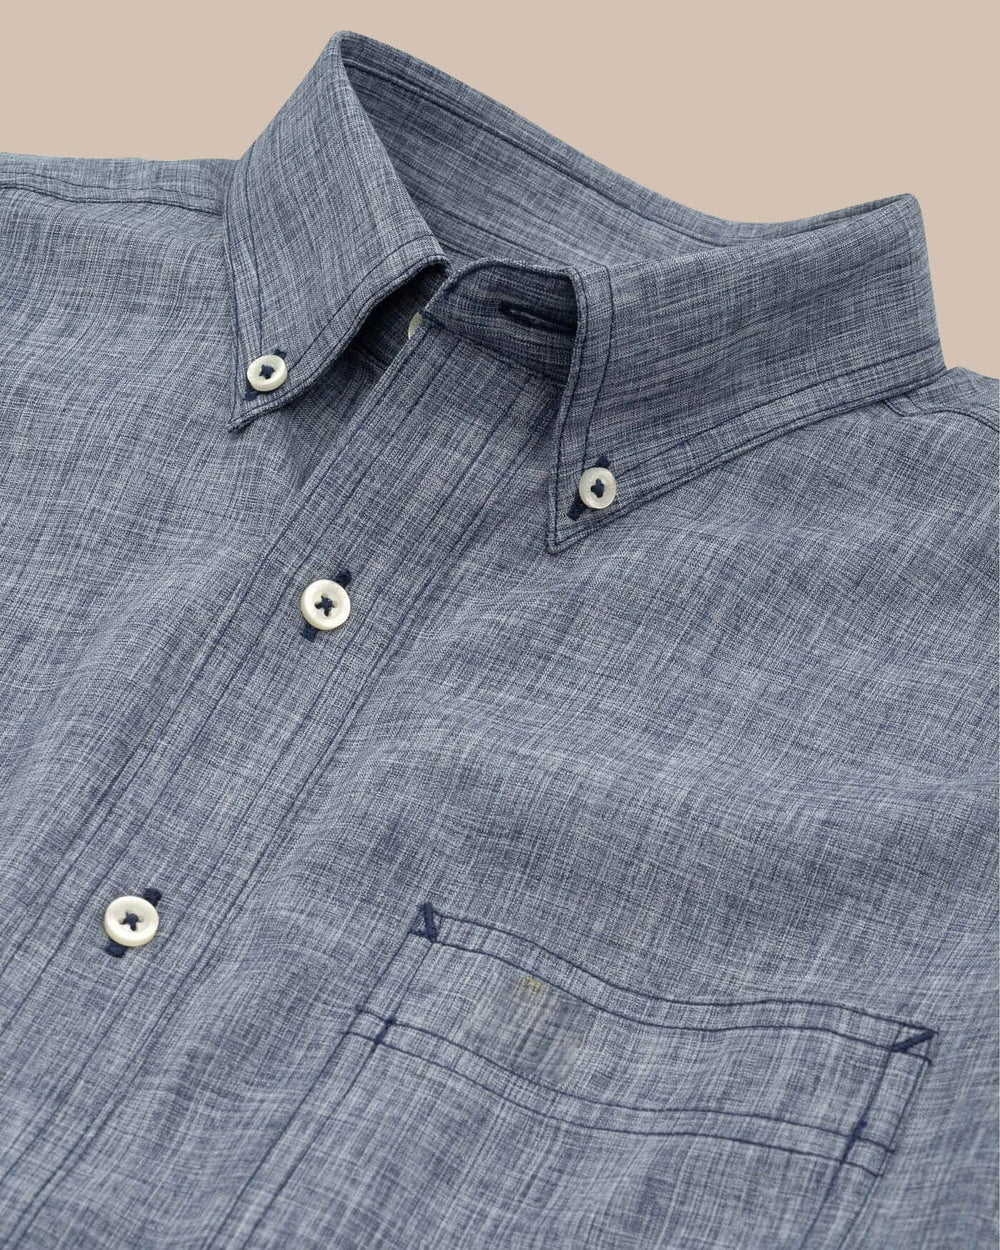 The detail of the Men's Navy Short Sleeve Dock Shirt by Southern Tide - Navy